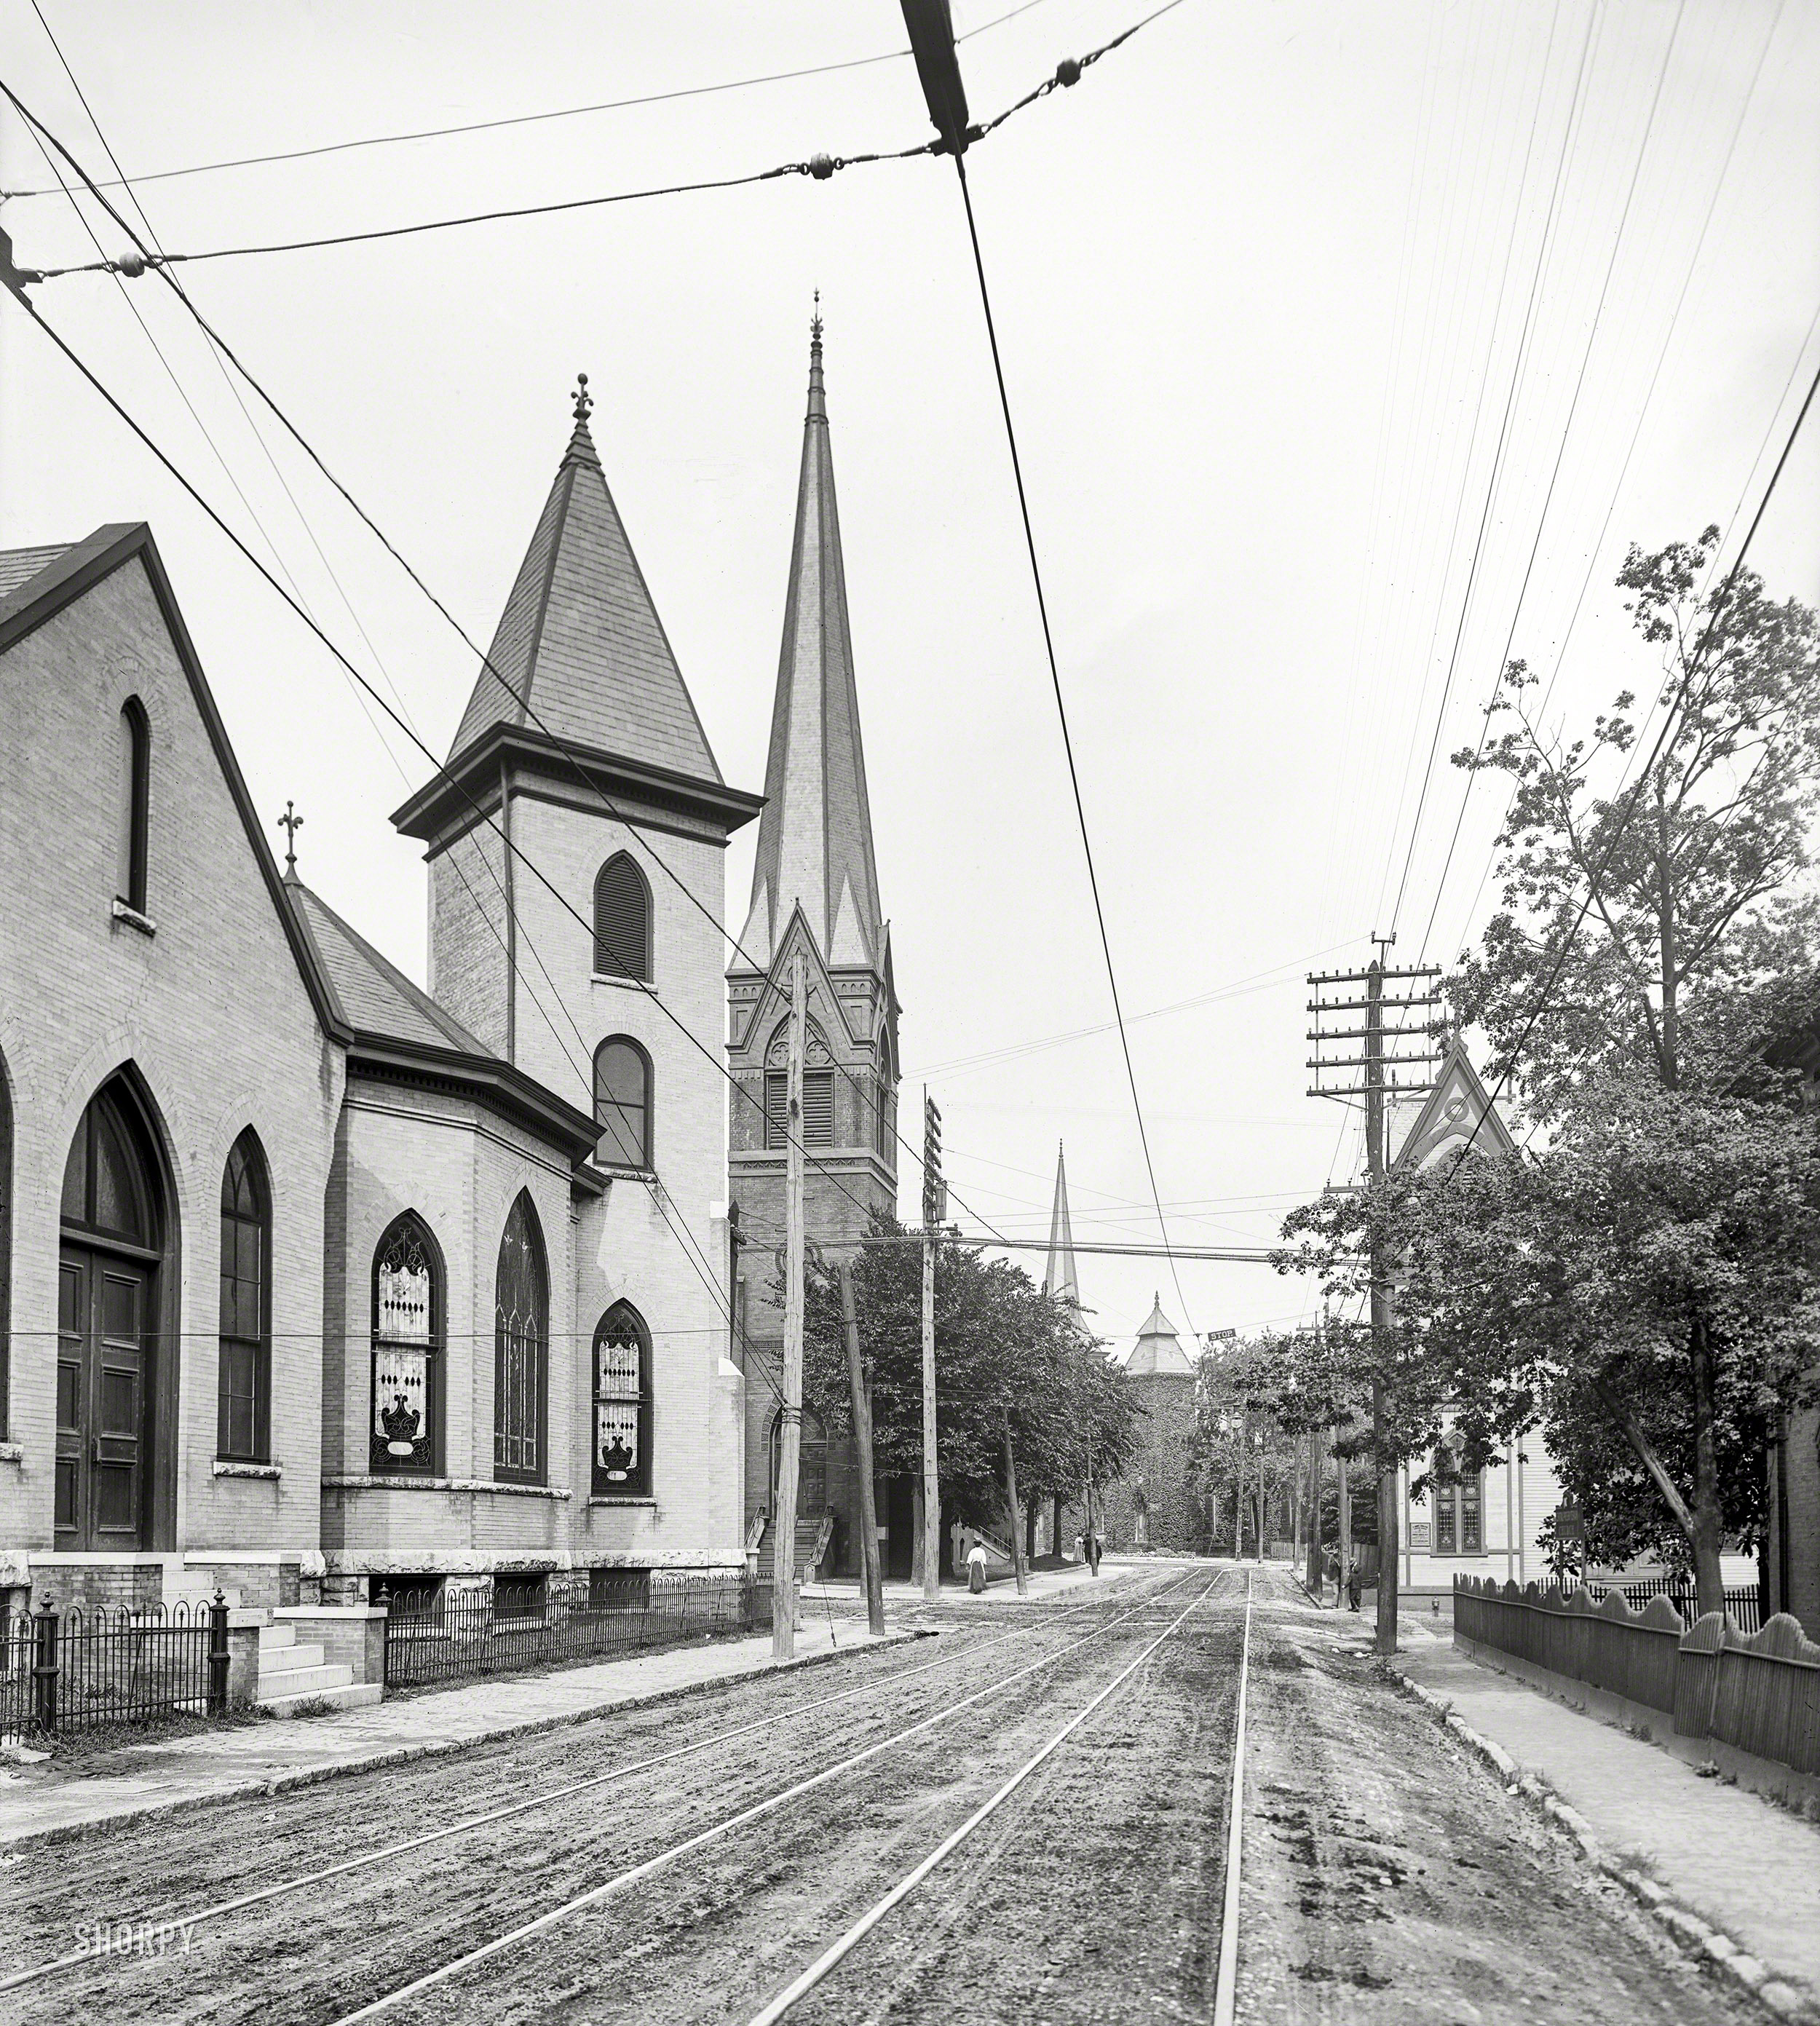 Circa 1905. "Broadway & Fifth Avenue, looking east, Knoxville, Tennessee." 8x10 inch dry plate glass negative, Detroit Publishing Company. View full size.